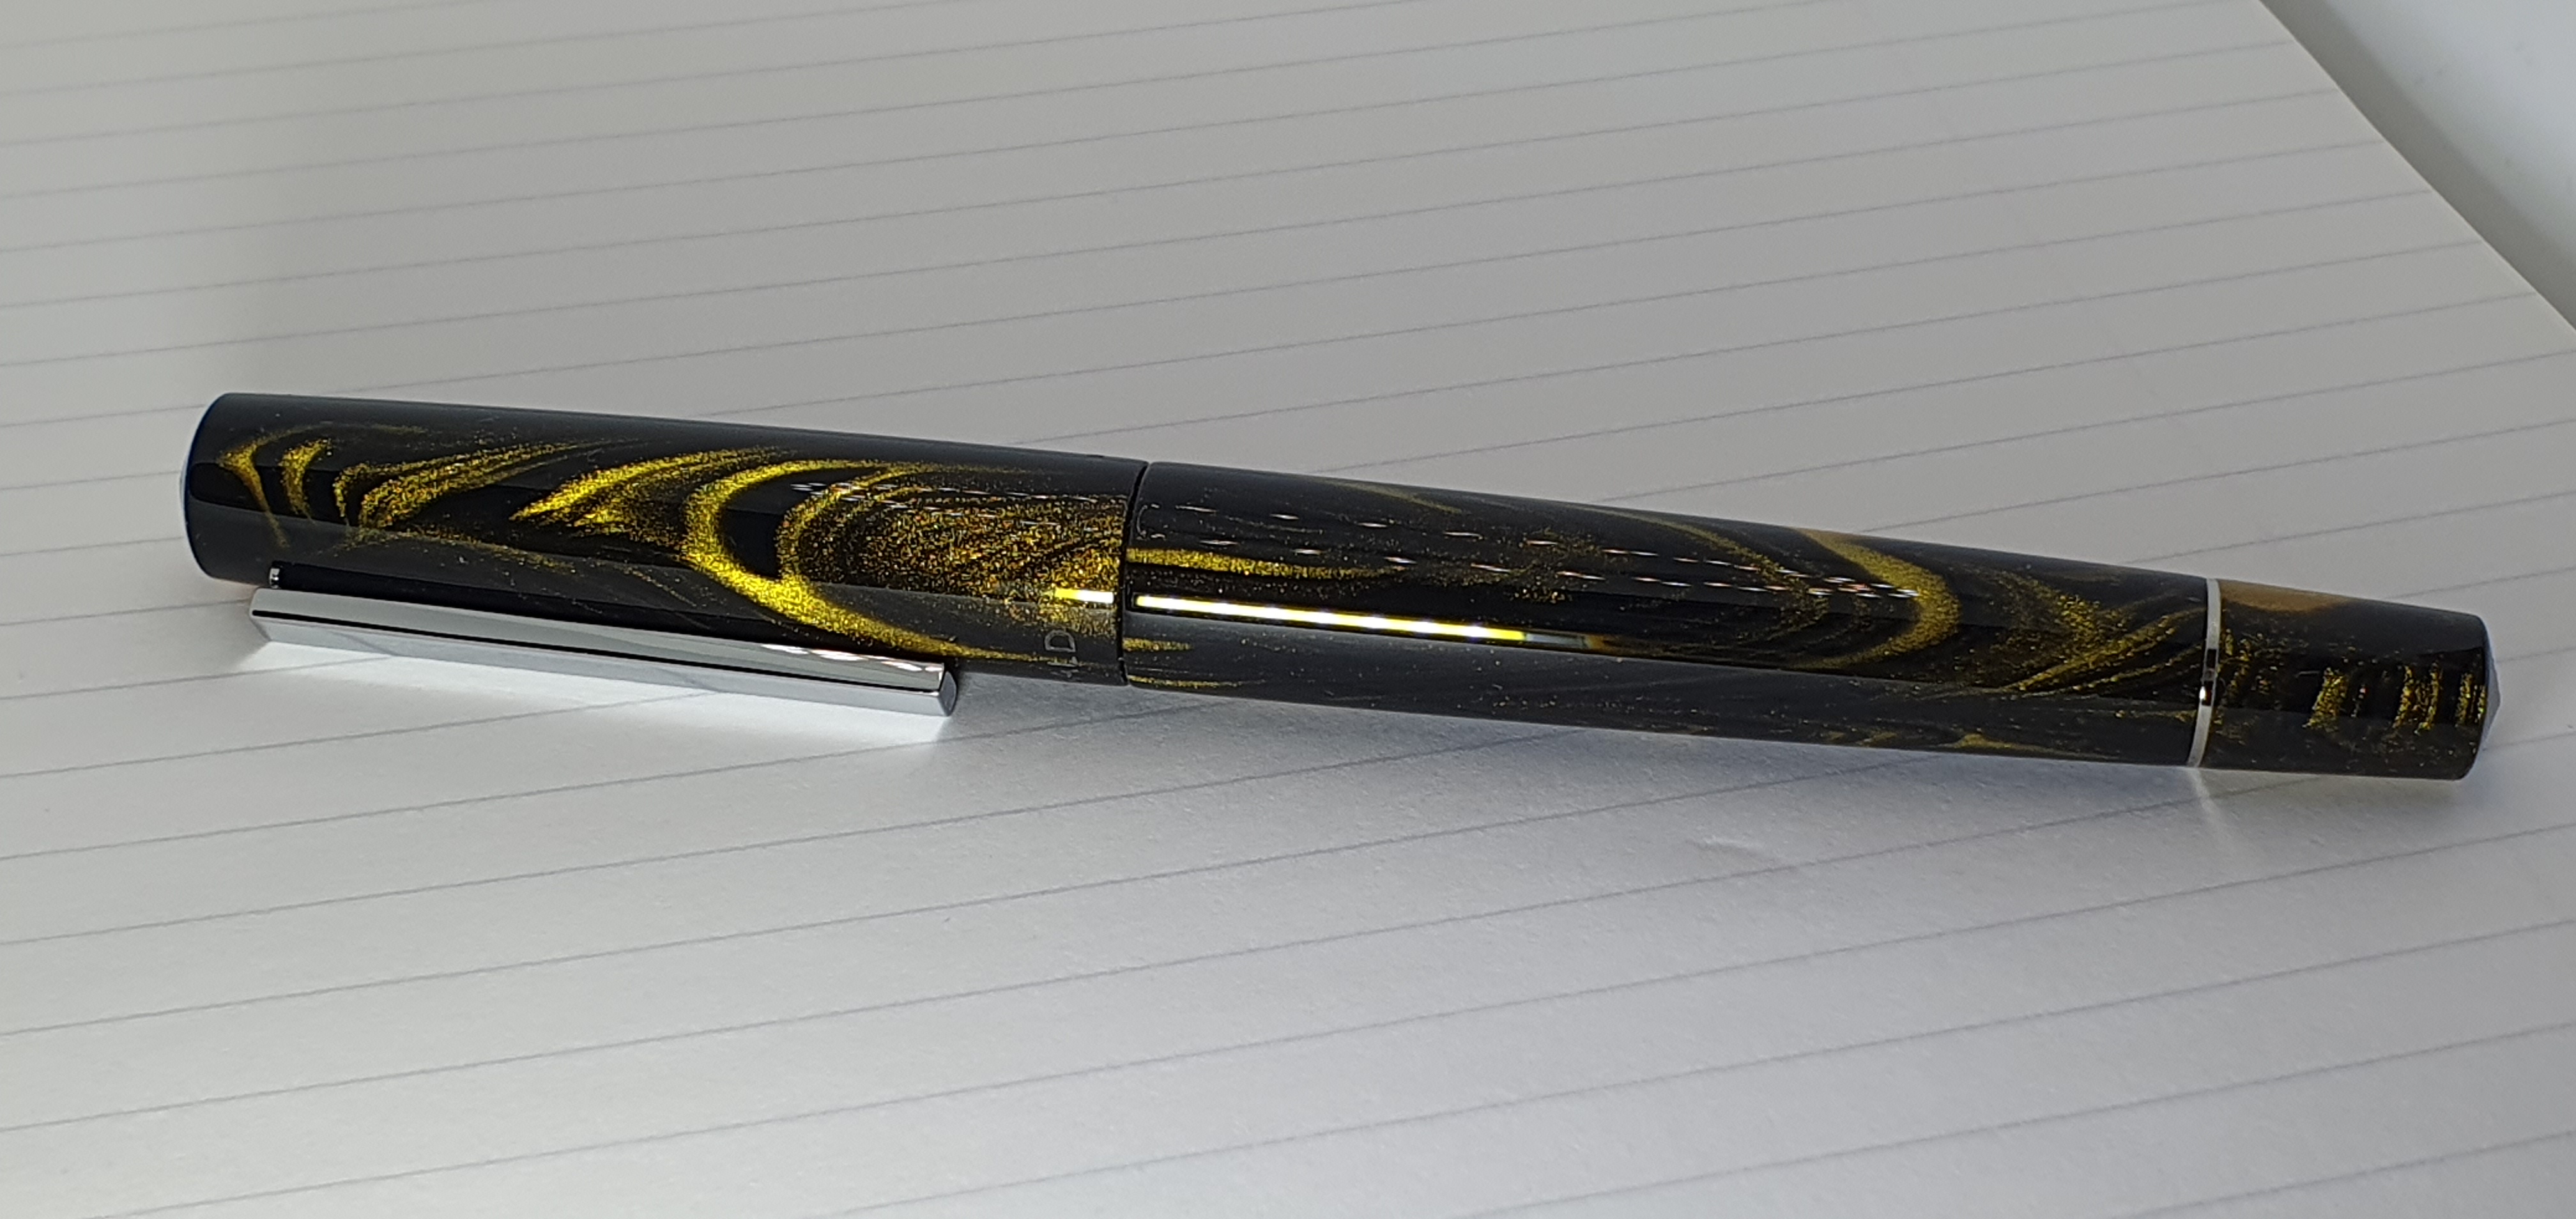 Caring for your fountain pen - Blog